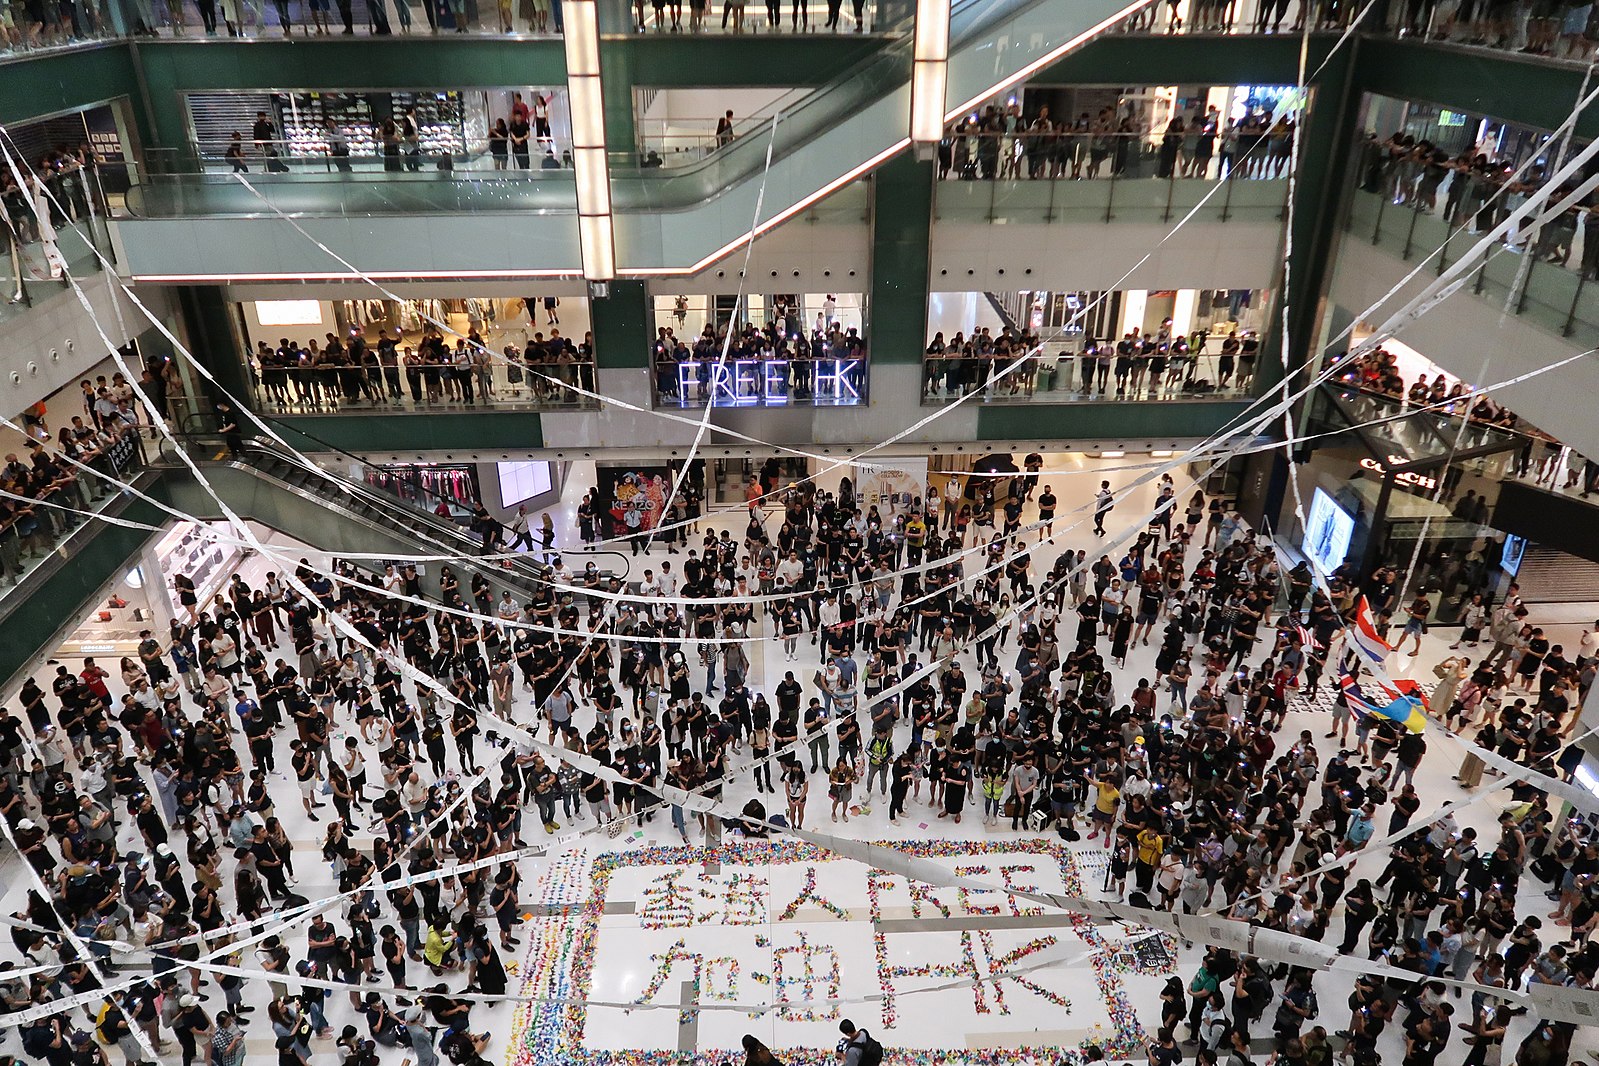 Protest and algorithms: What modern security teams need to know  - protest in new town plaza HK